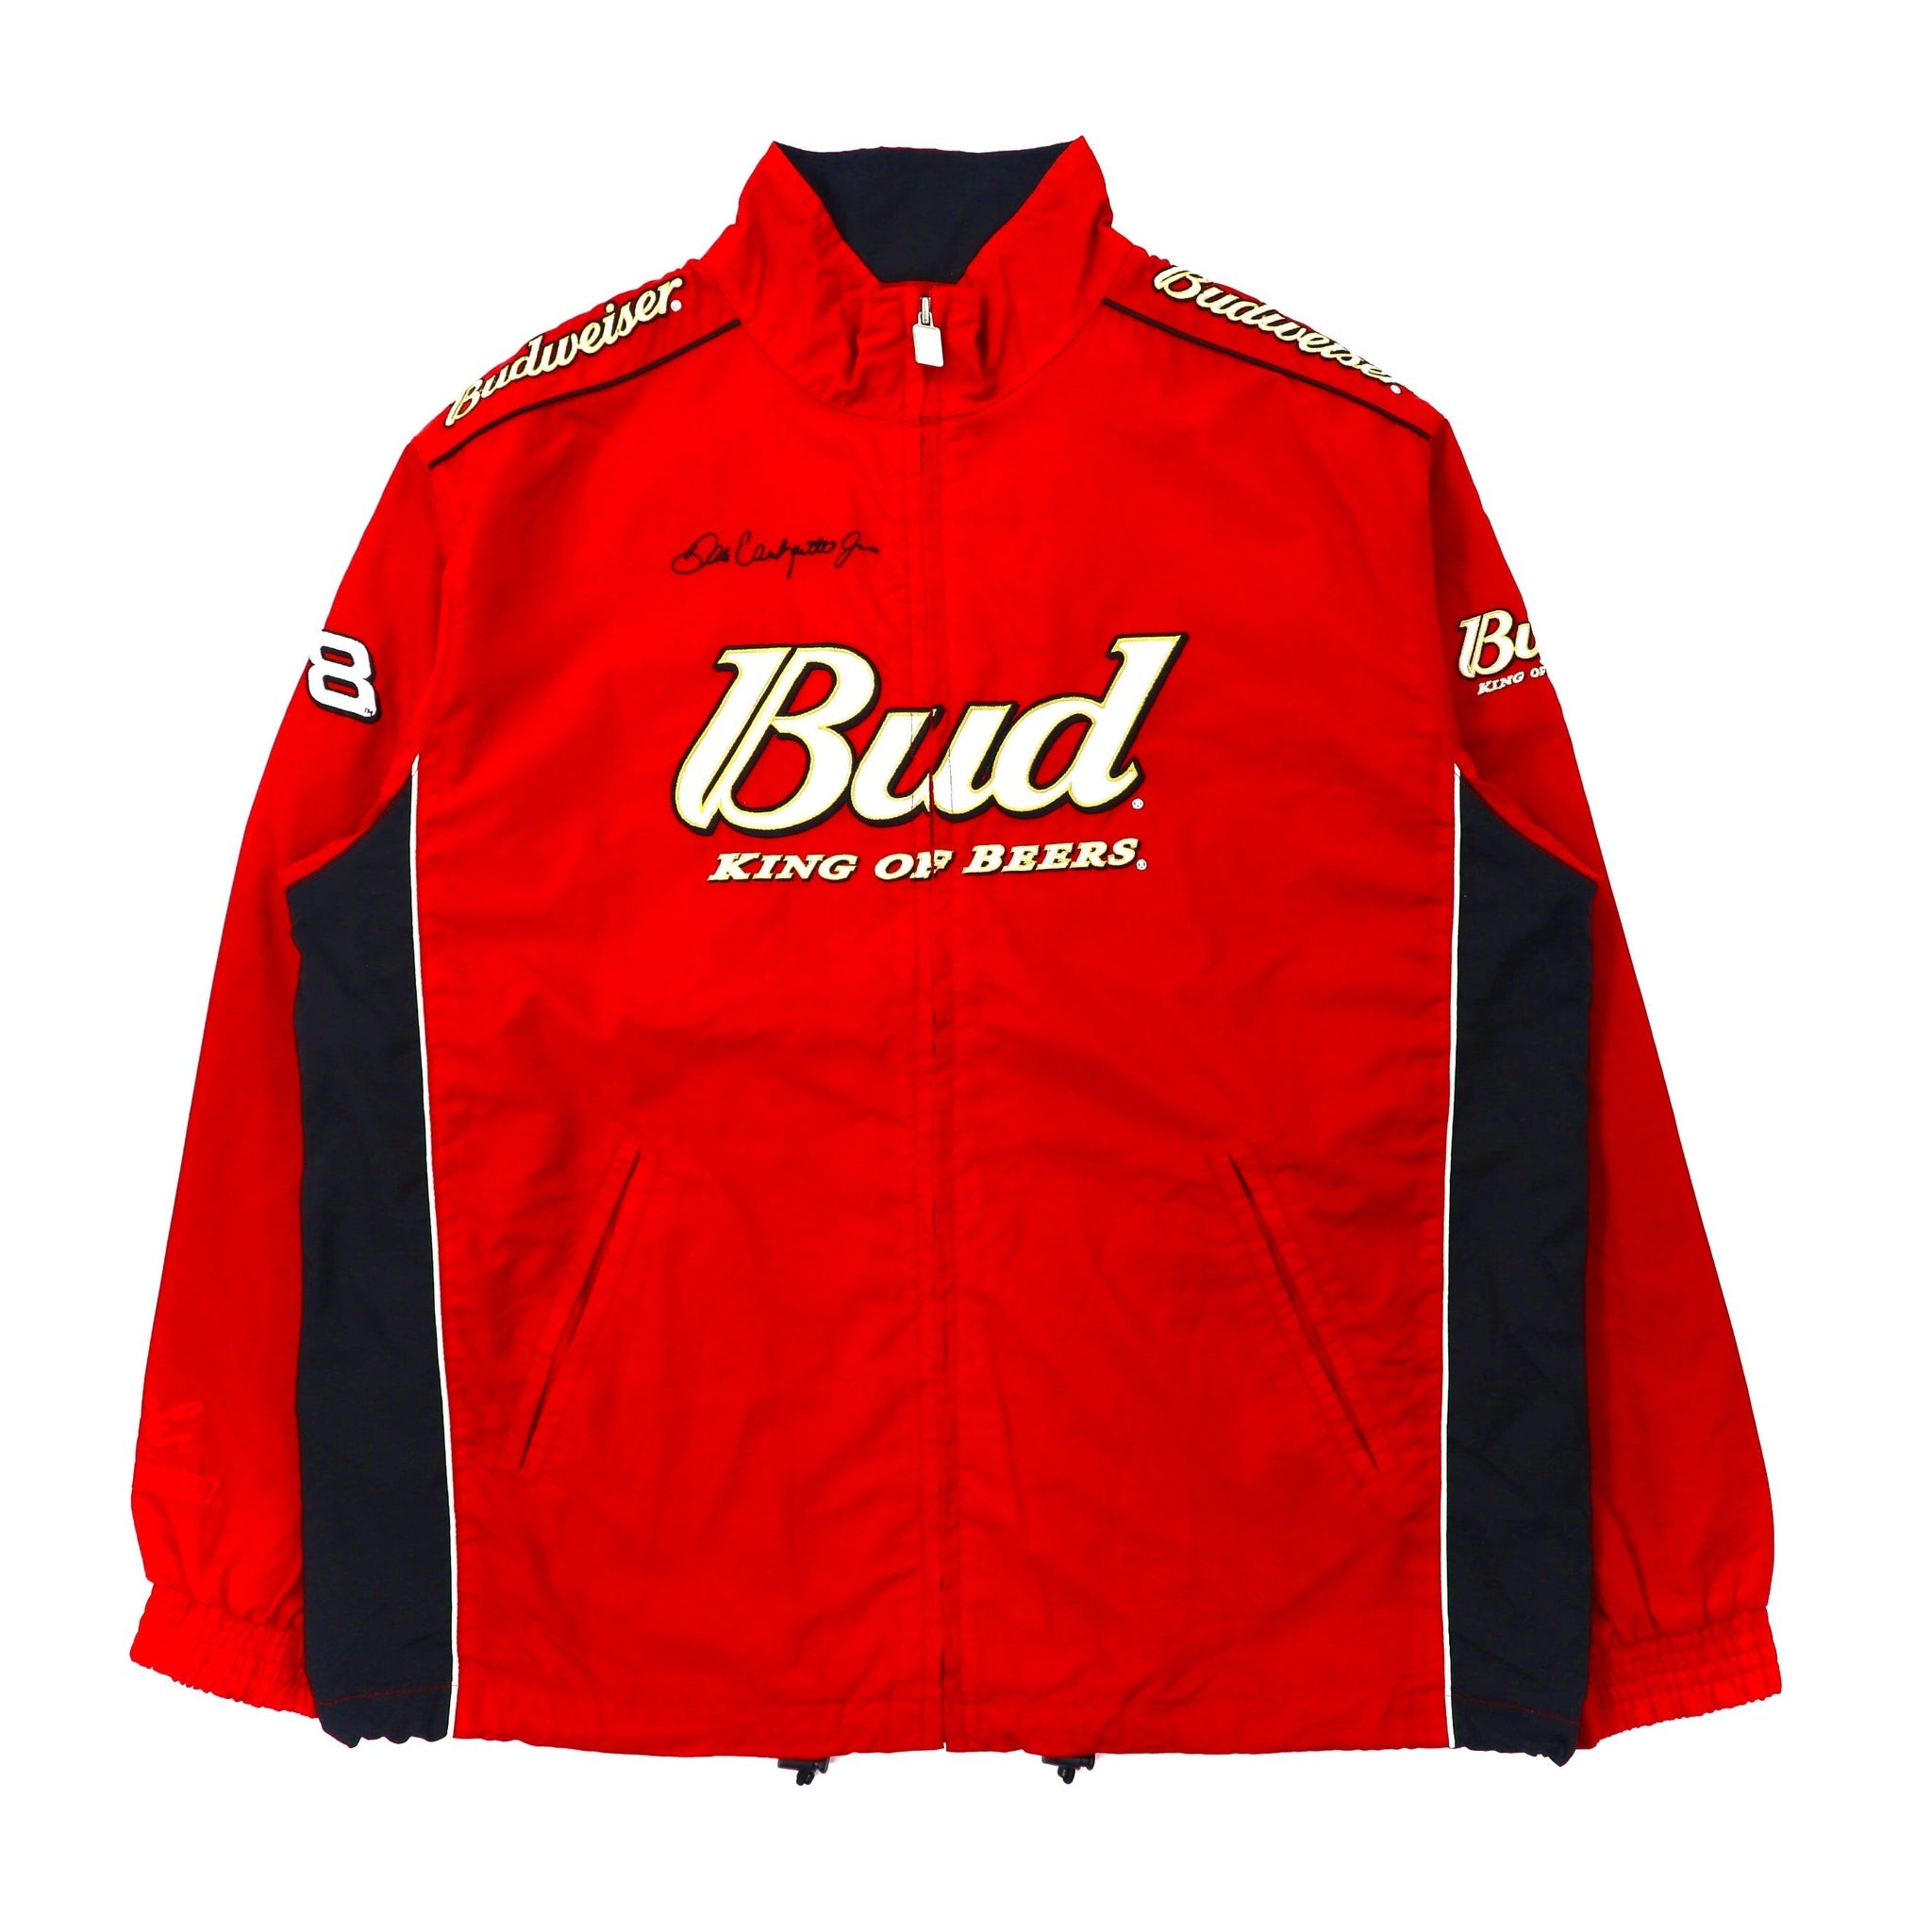 CHASE AUTHENTICS Racing Jacket M Red Nylon Budweiser Embroidery – 日本然リトテ